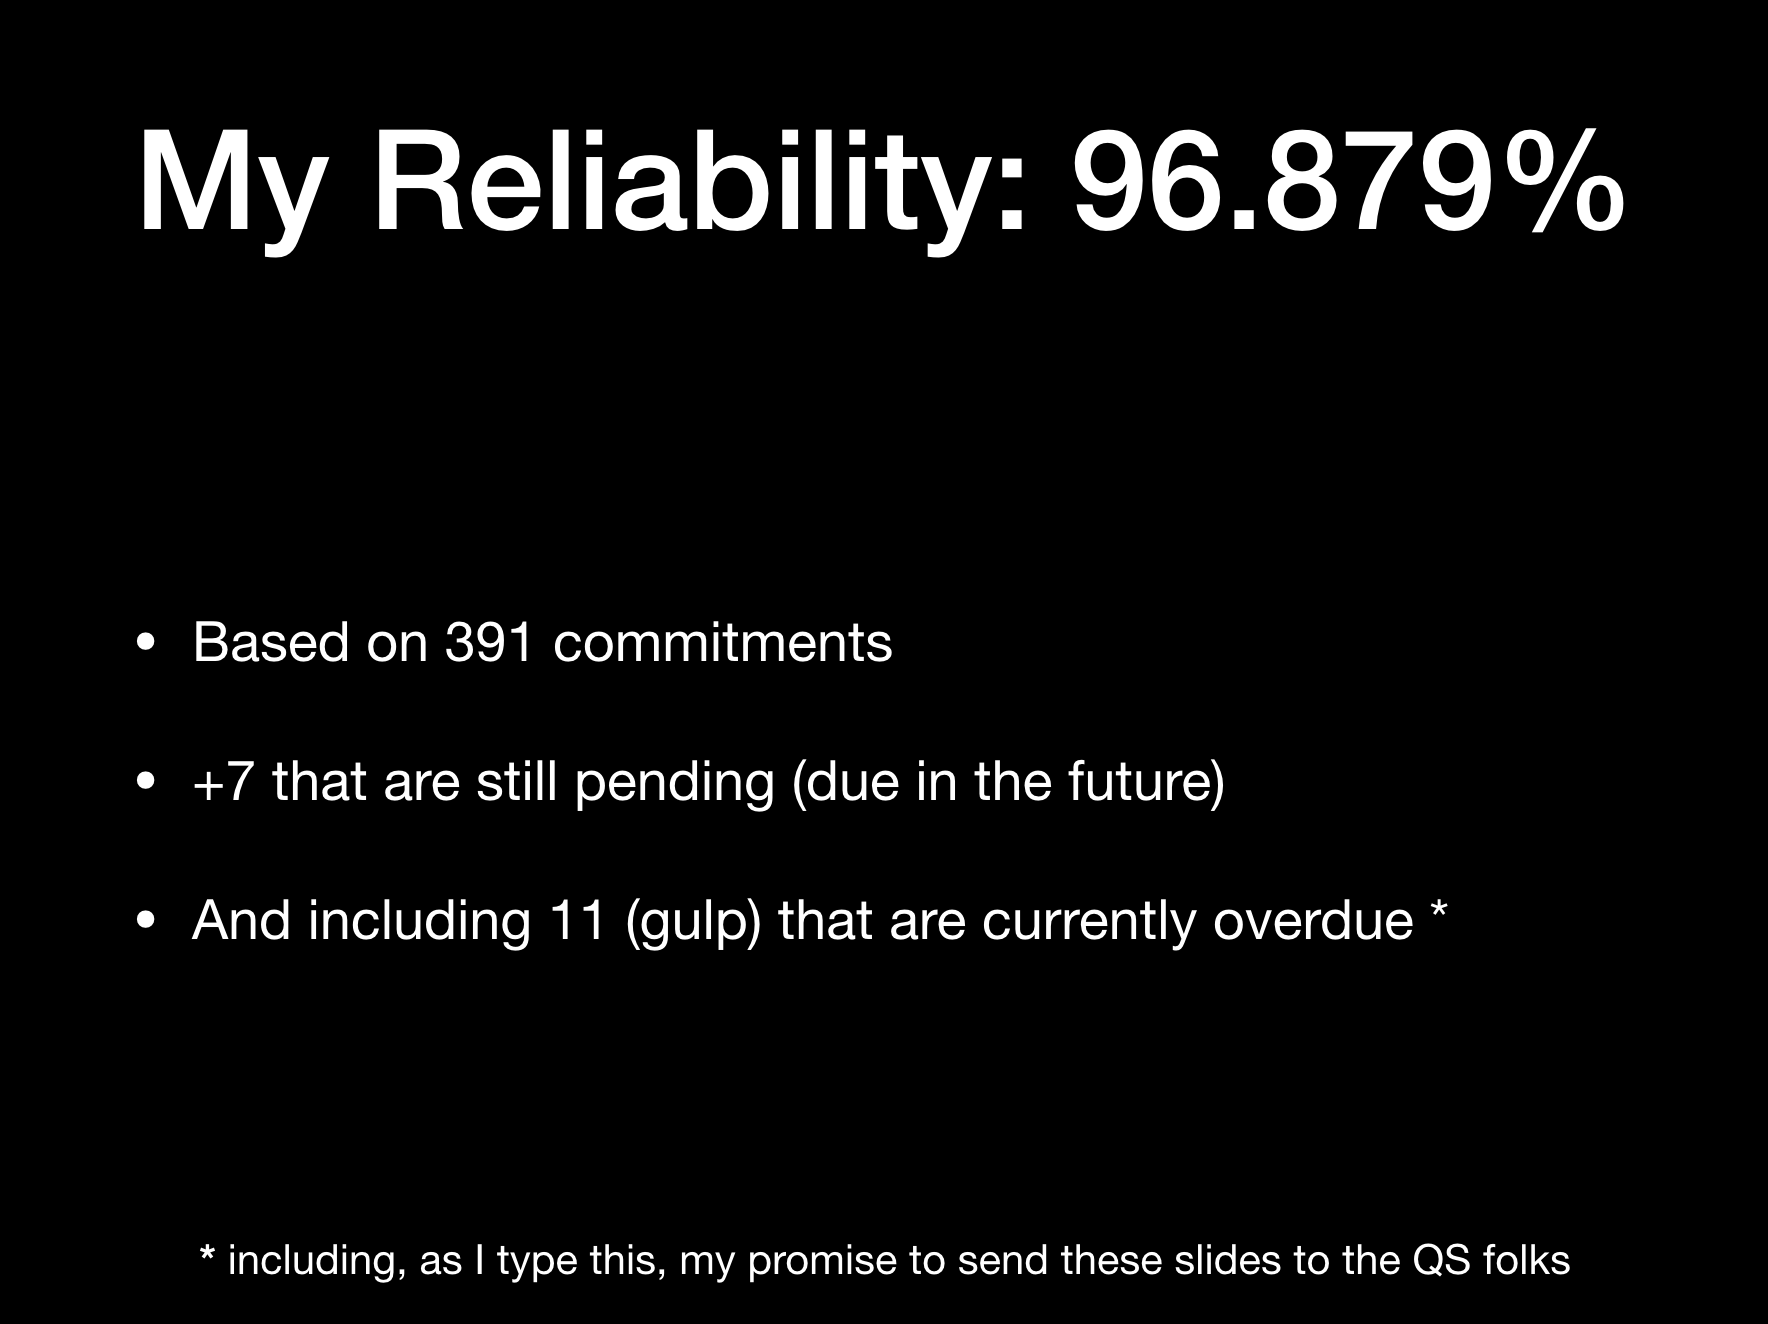 My Reliability: 96.879%  
* Based on 391 commitments  
* +7 that are still pending (due in the future)  
* And including 11 (gulp) that are currently overdue [1]  
(footnote: [1] including, as I type this, my promise to send these slides to the QS folks